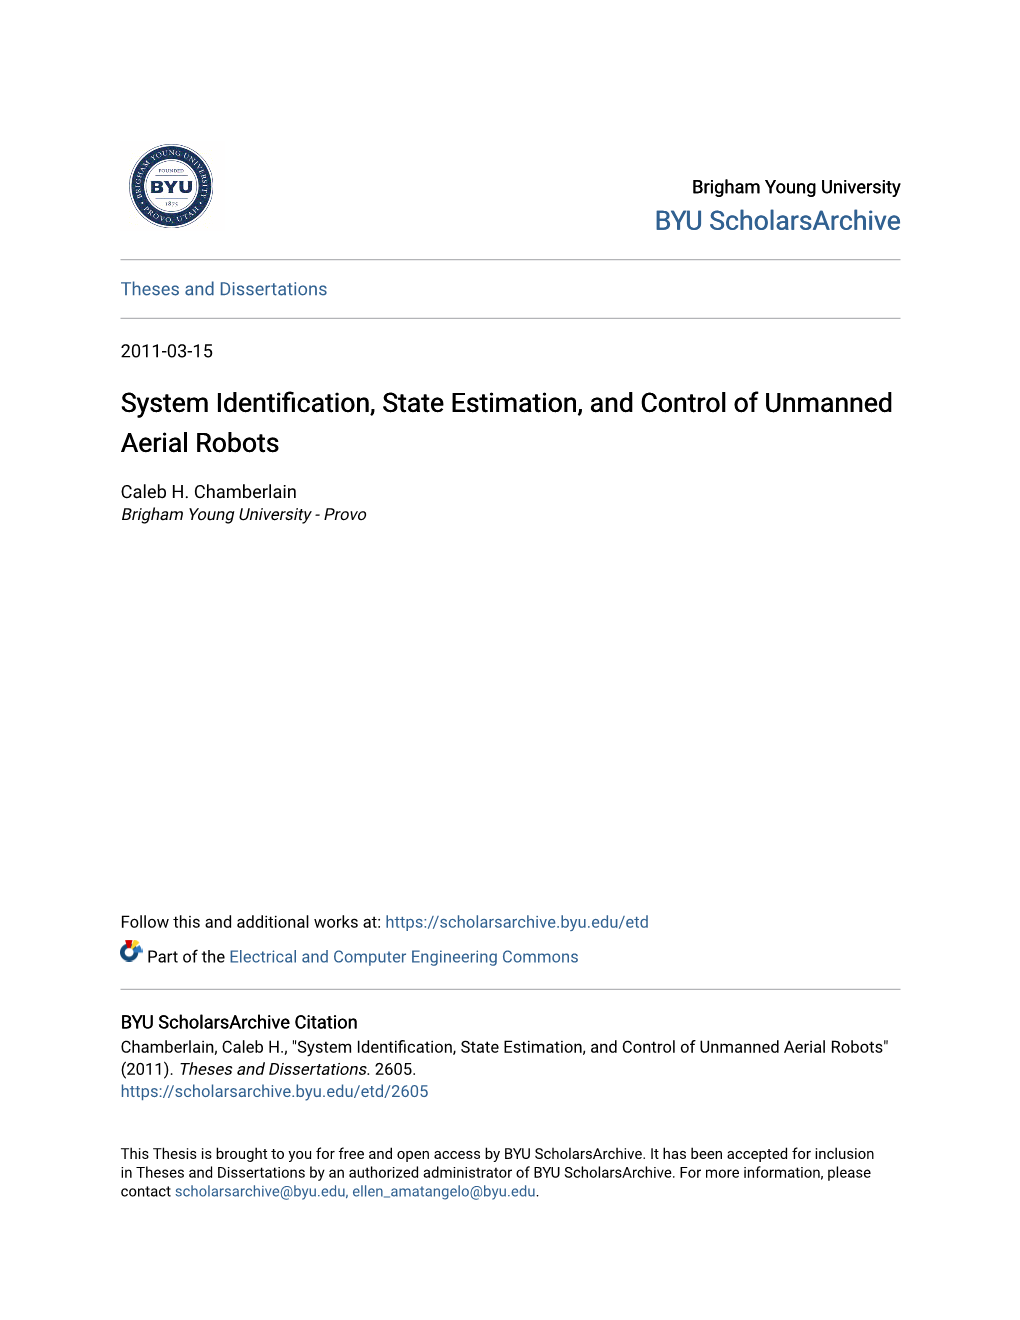 System Identification, State Estimation, and Control of Unmanned Aerial Robots